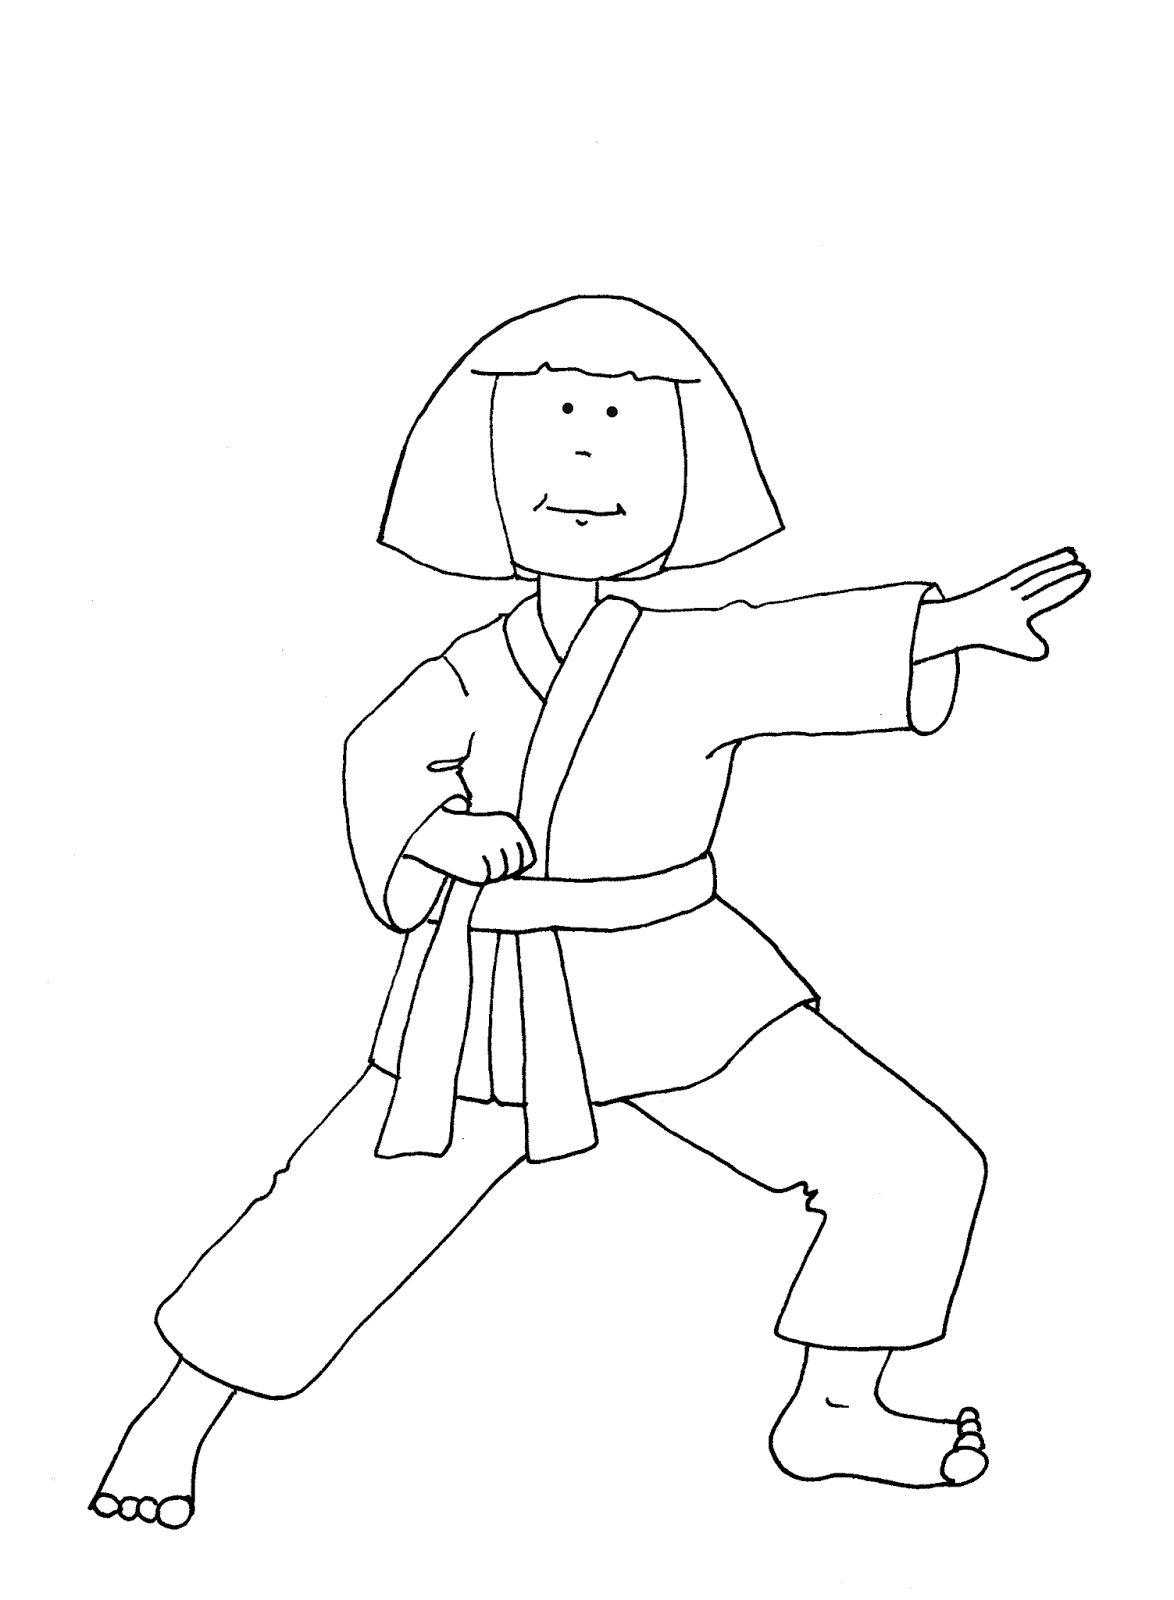 karate coloring pages to print